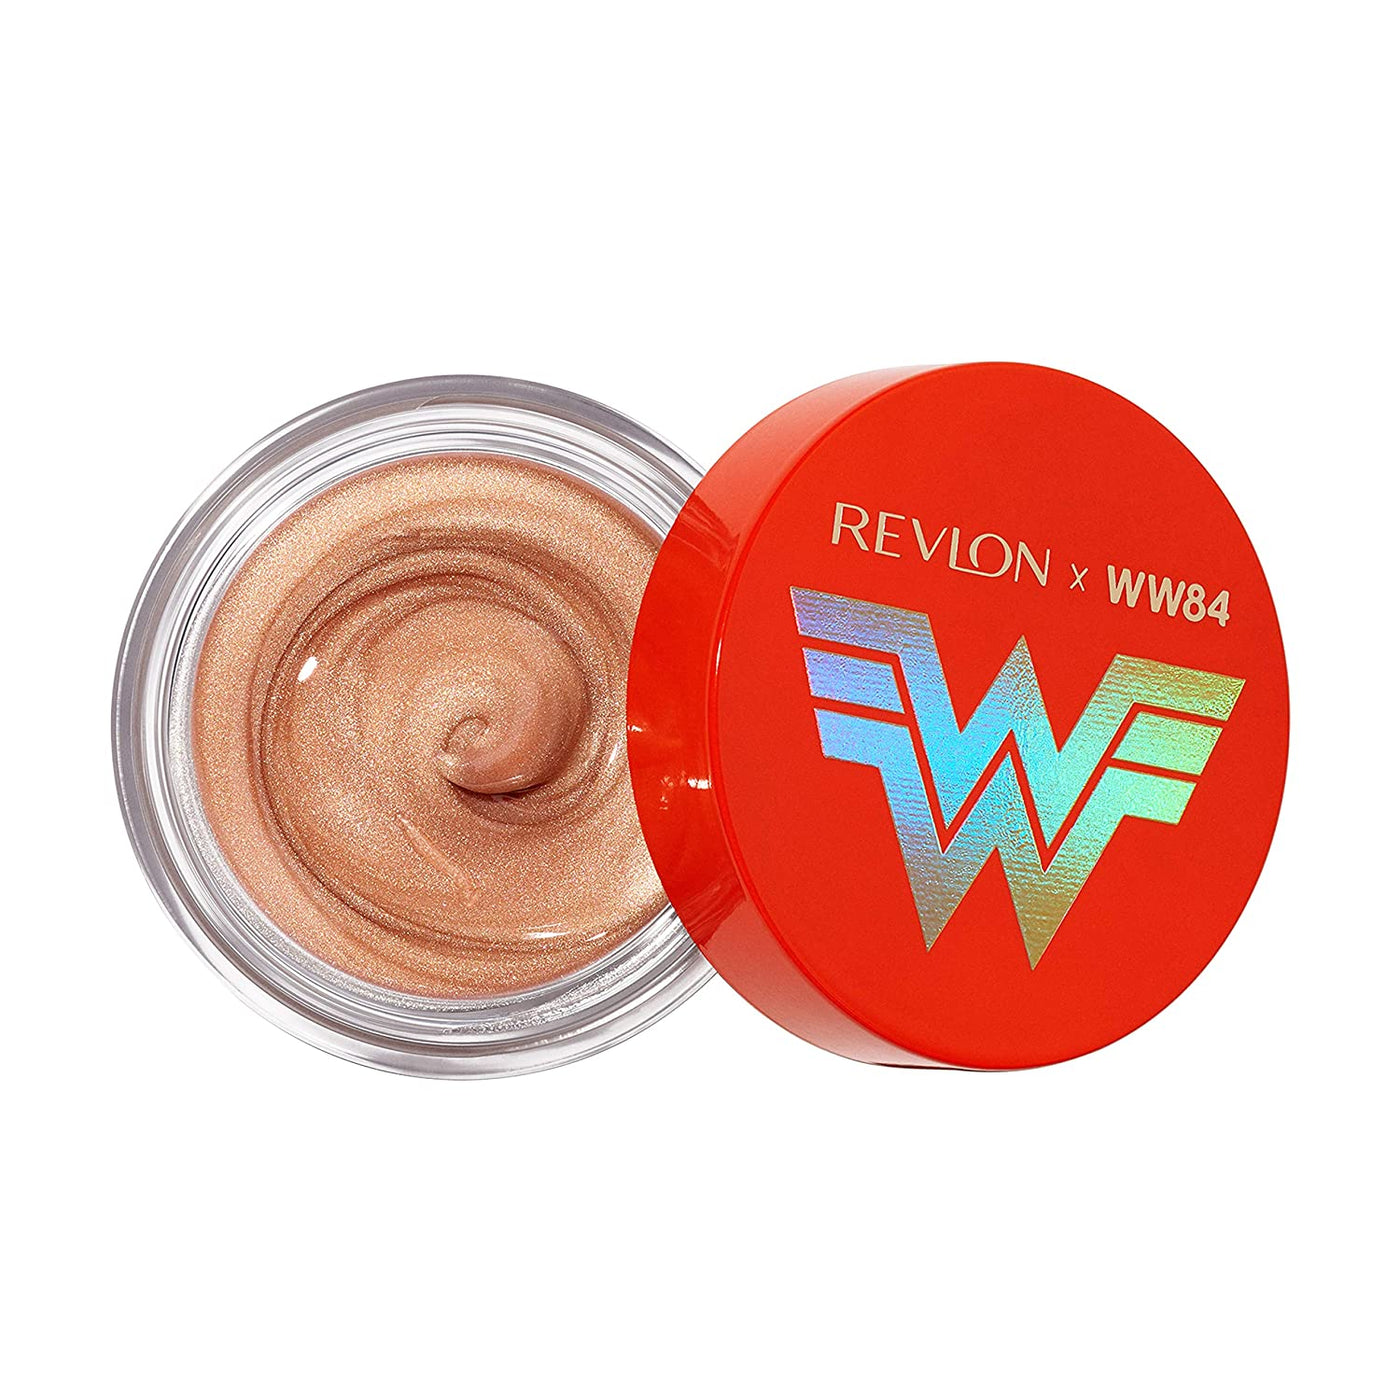 REVLON x WW84 Wonder Woman Liquid Armor Glow Pot, Glossy Eye and Face Jelly Highlighter, in Champagne, 001 Golden Lasso, 0.24 oz